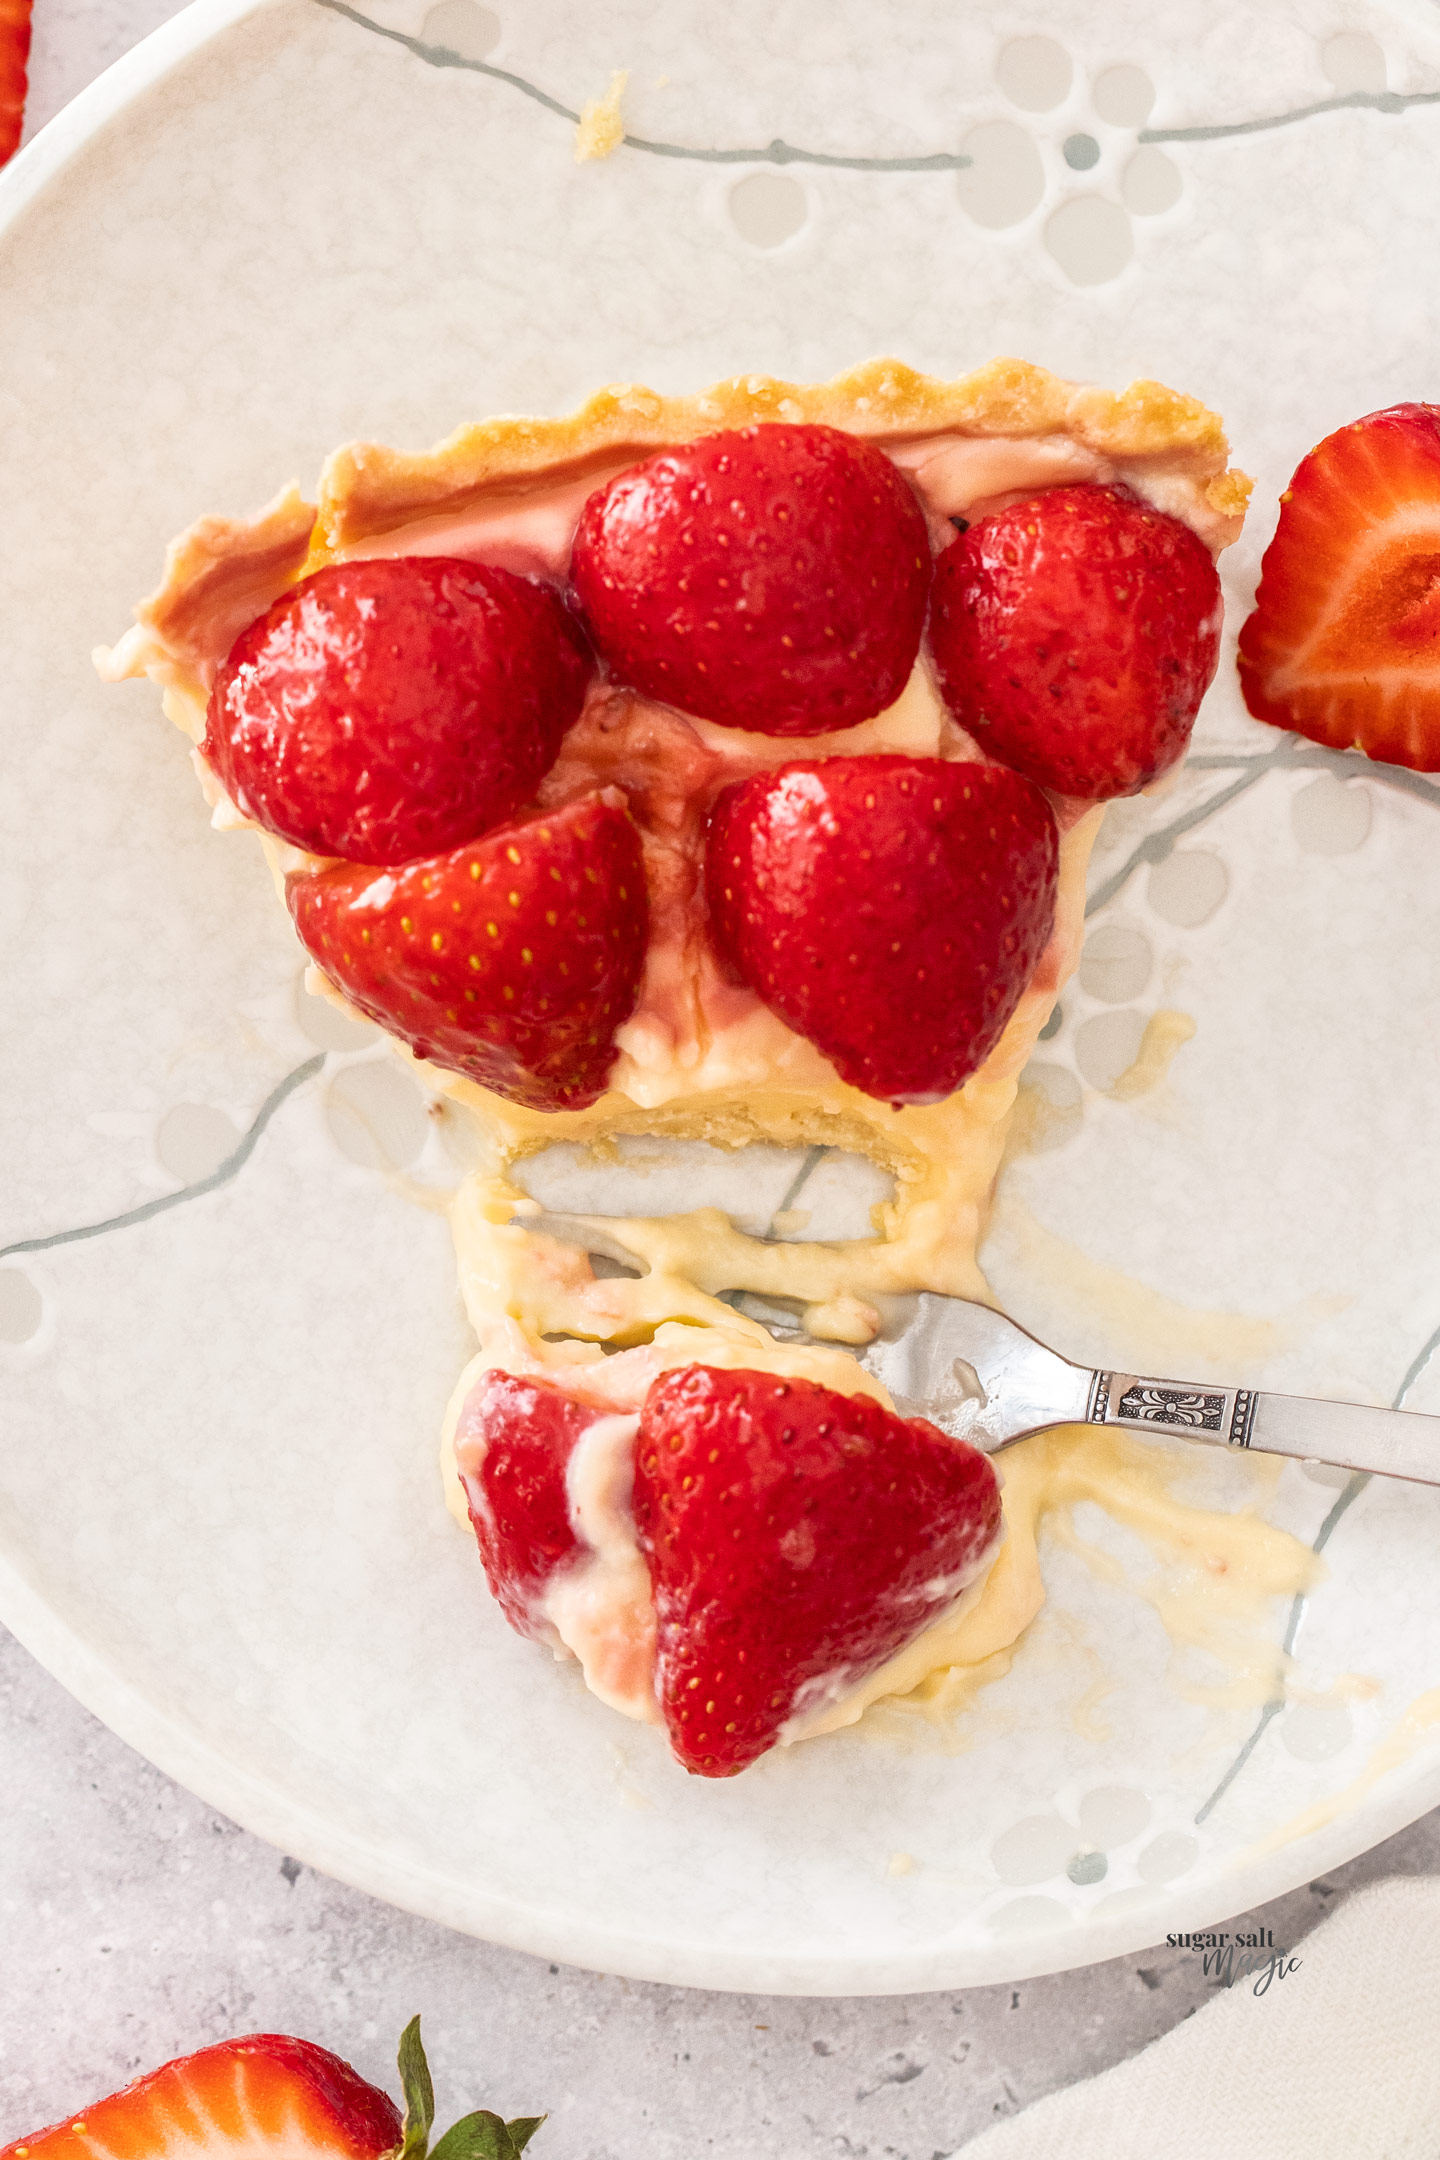 Top down view of a slice of strawberry tart with some cut away.